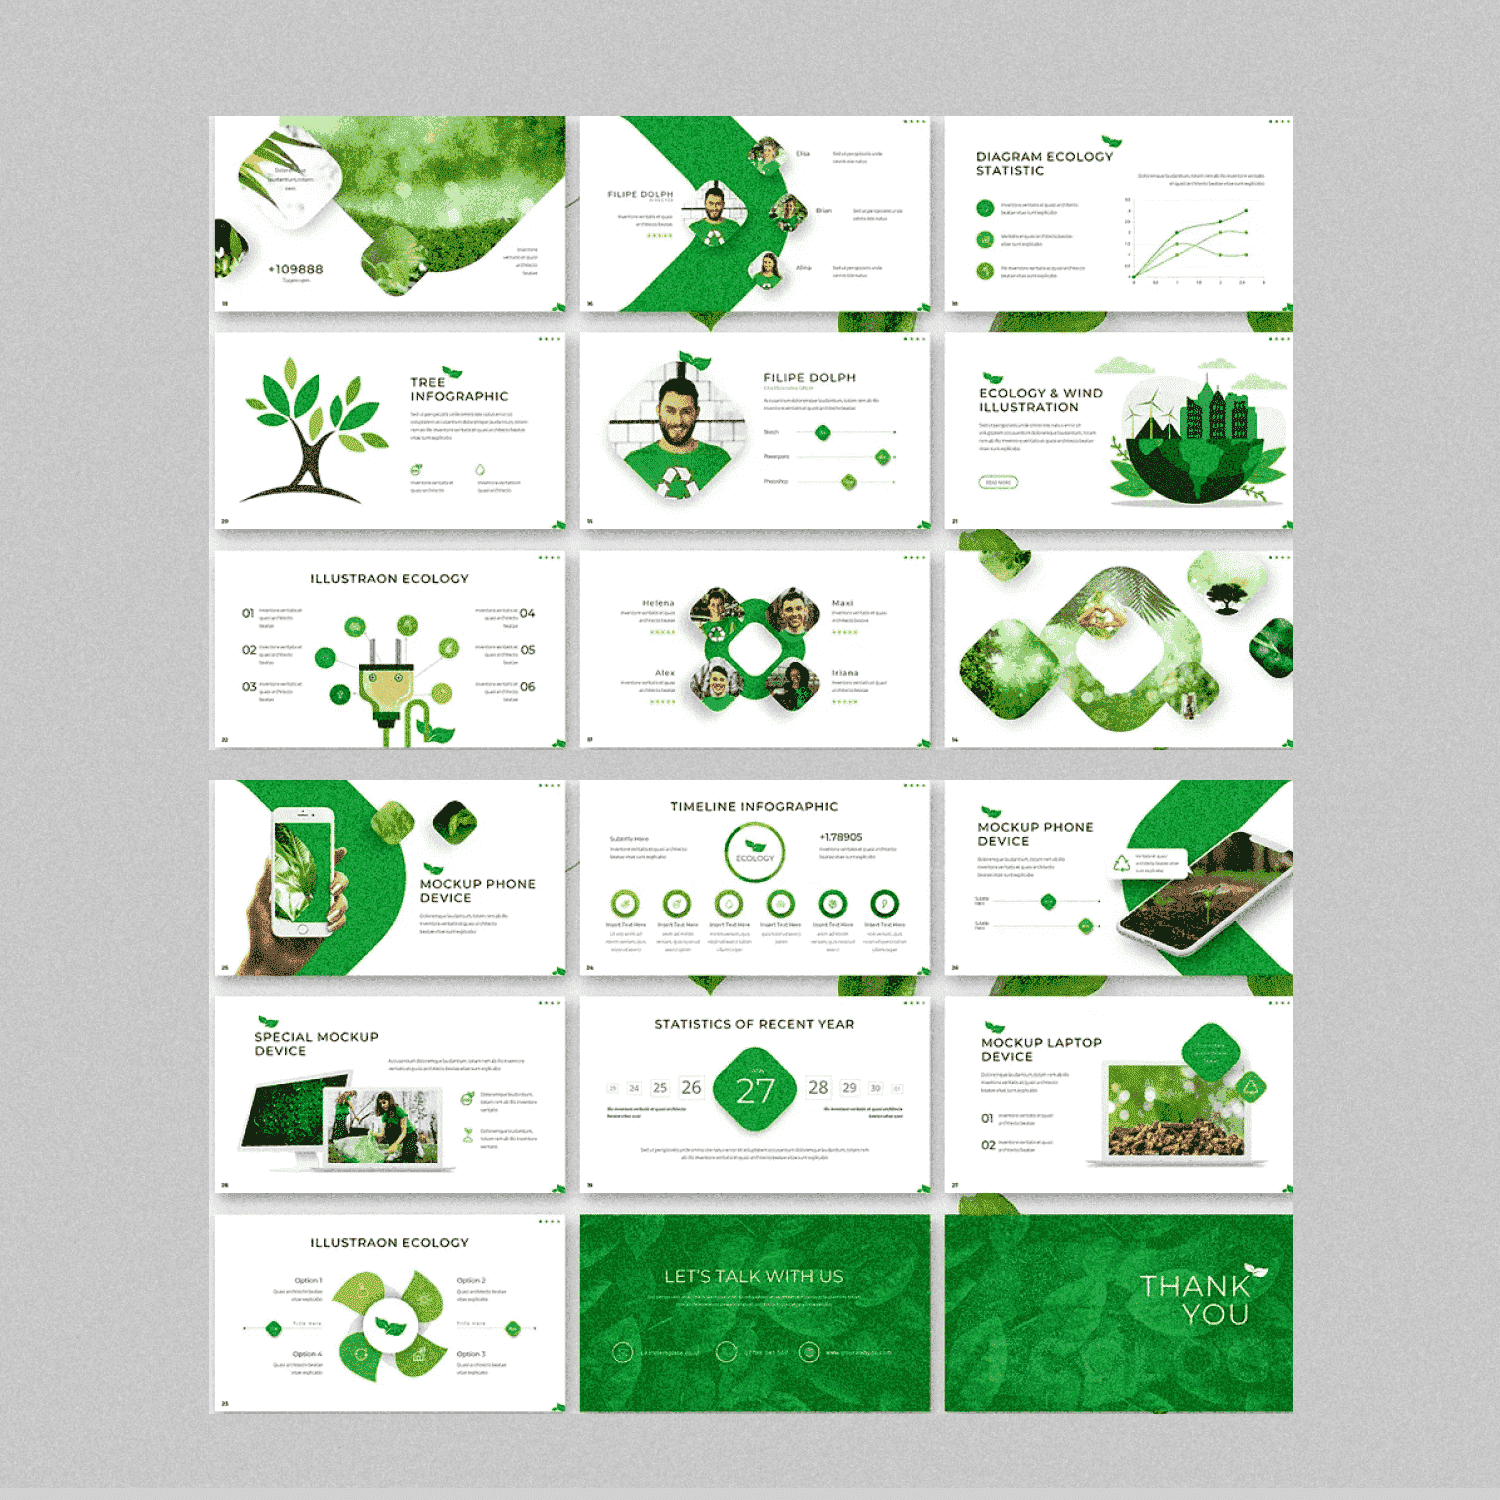 Ecology - Powerpoint Template Cover Image.